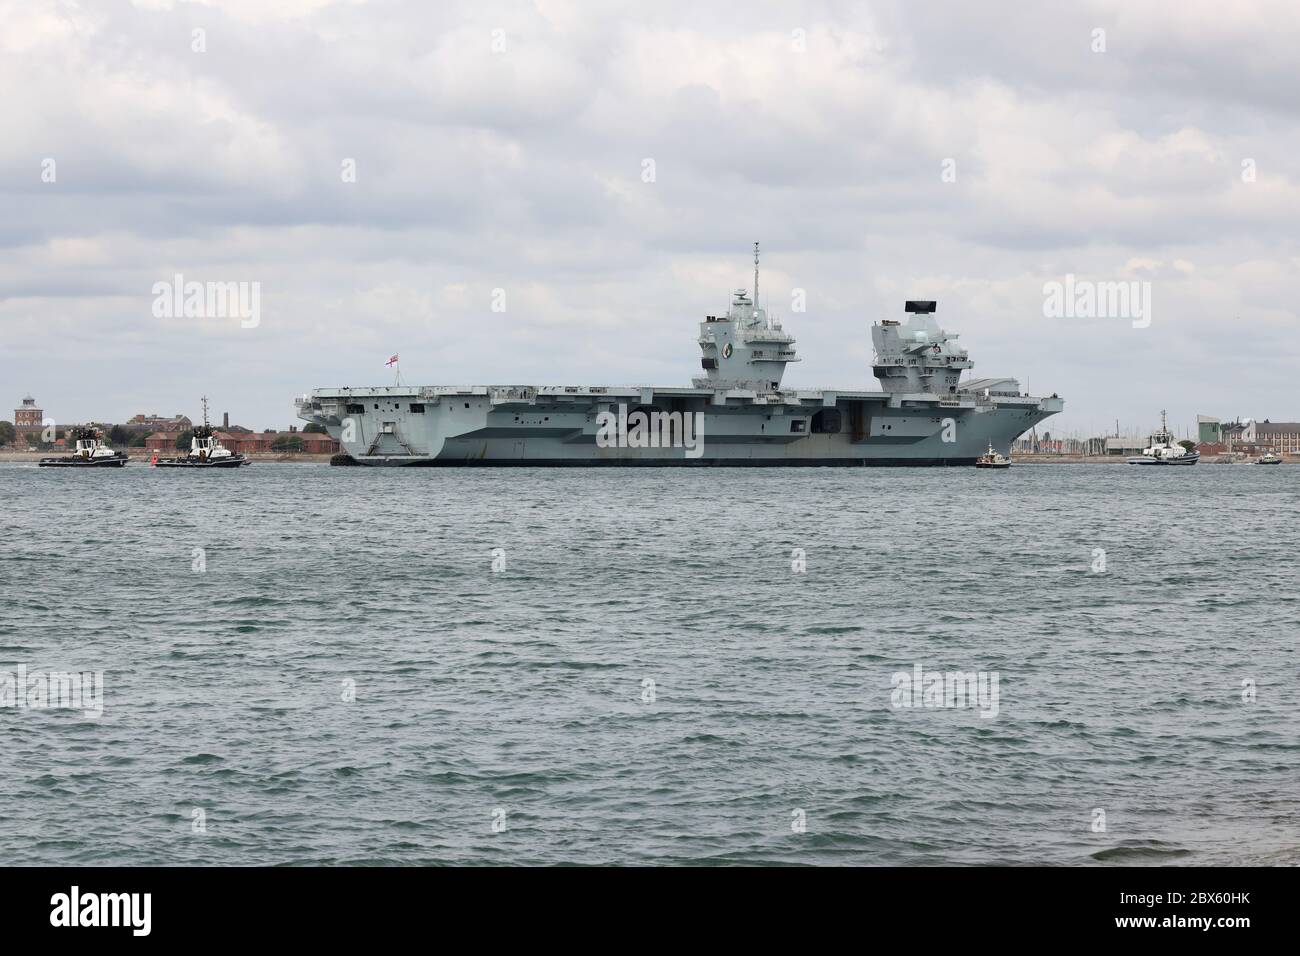 A small flotilla of tugs guide the Royal Navy aircraft carrier HMS QUEEN ELIZABETH towards the harbour entrance this morning Stock Photo